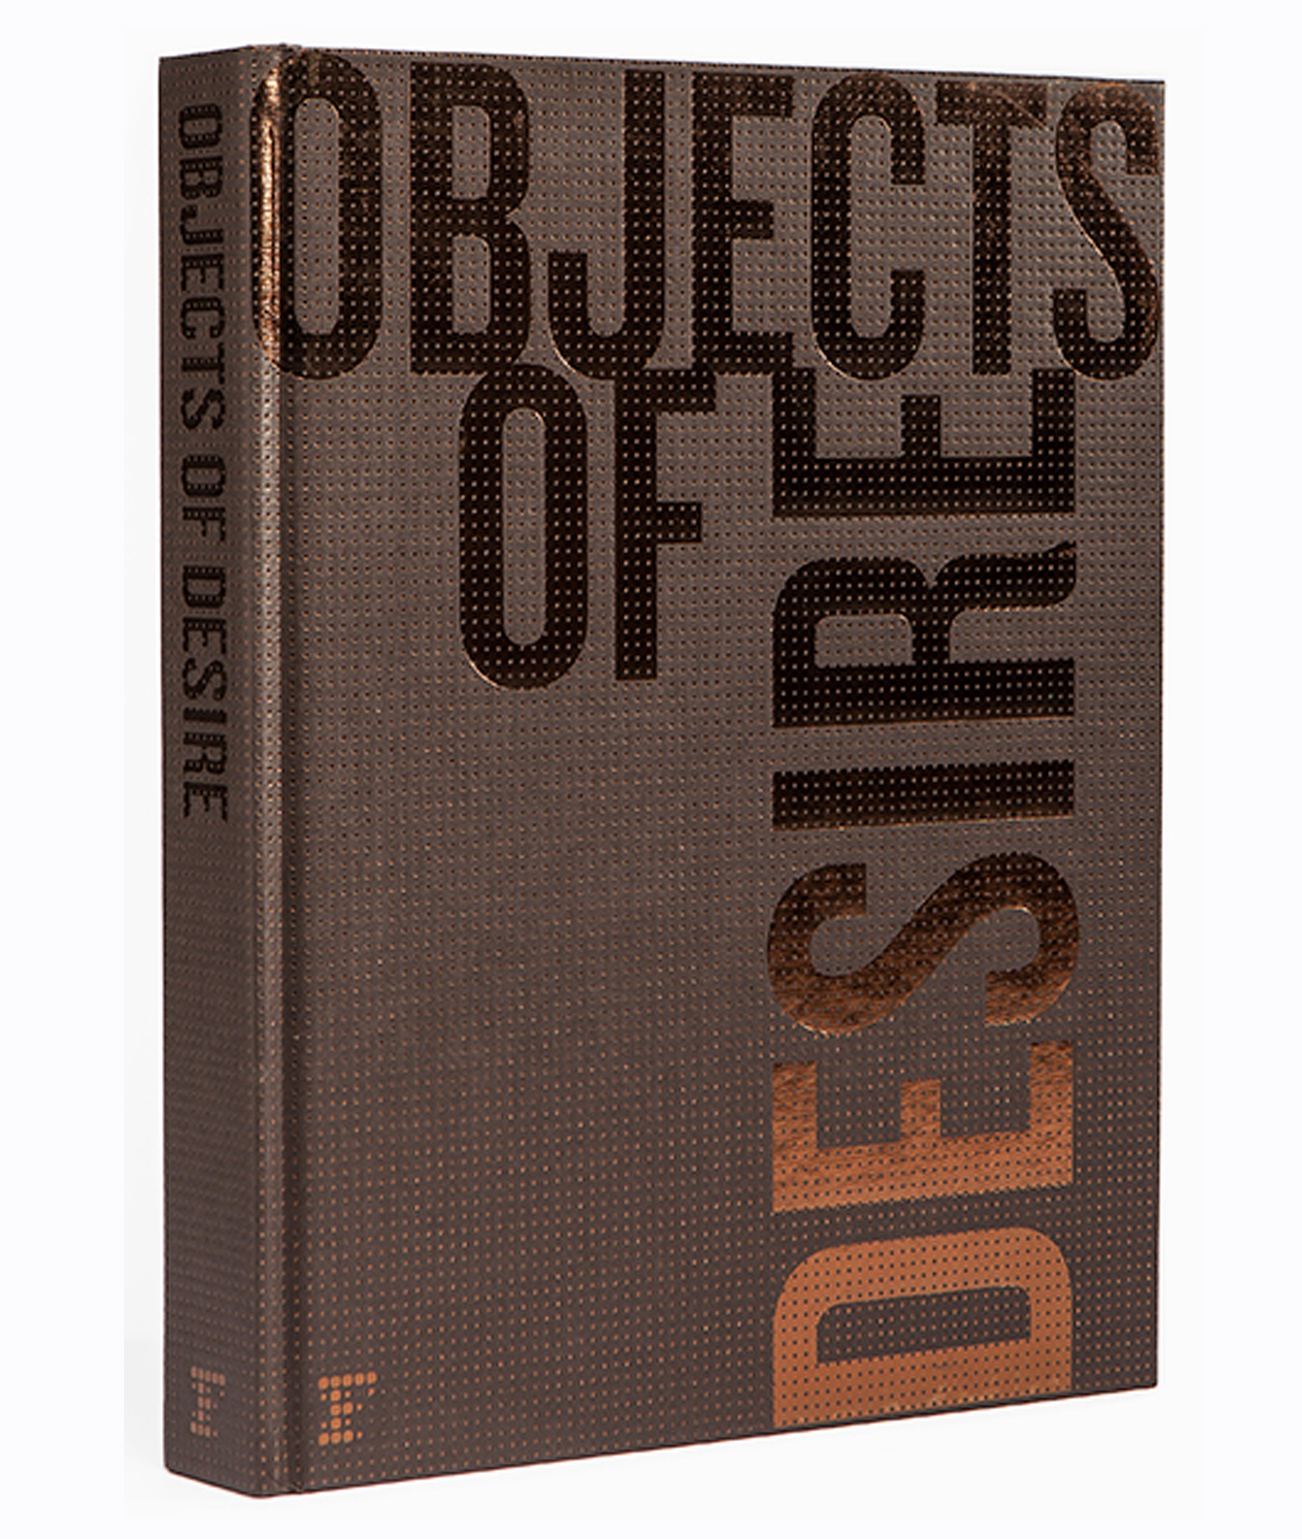 Brent Black Featured in Objects of Desire